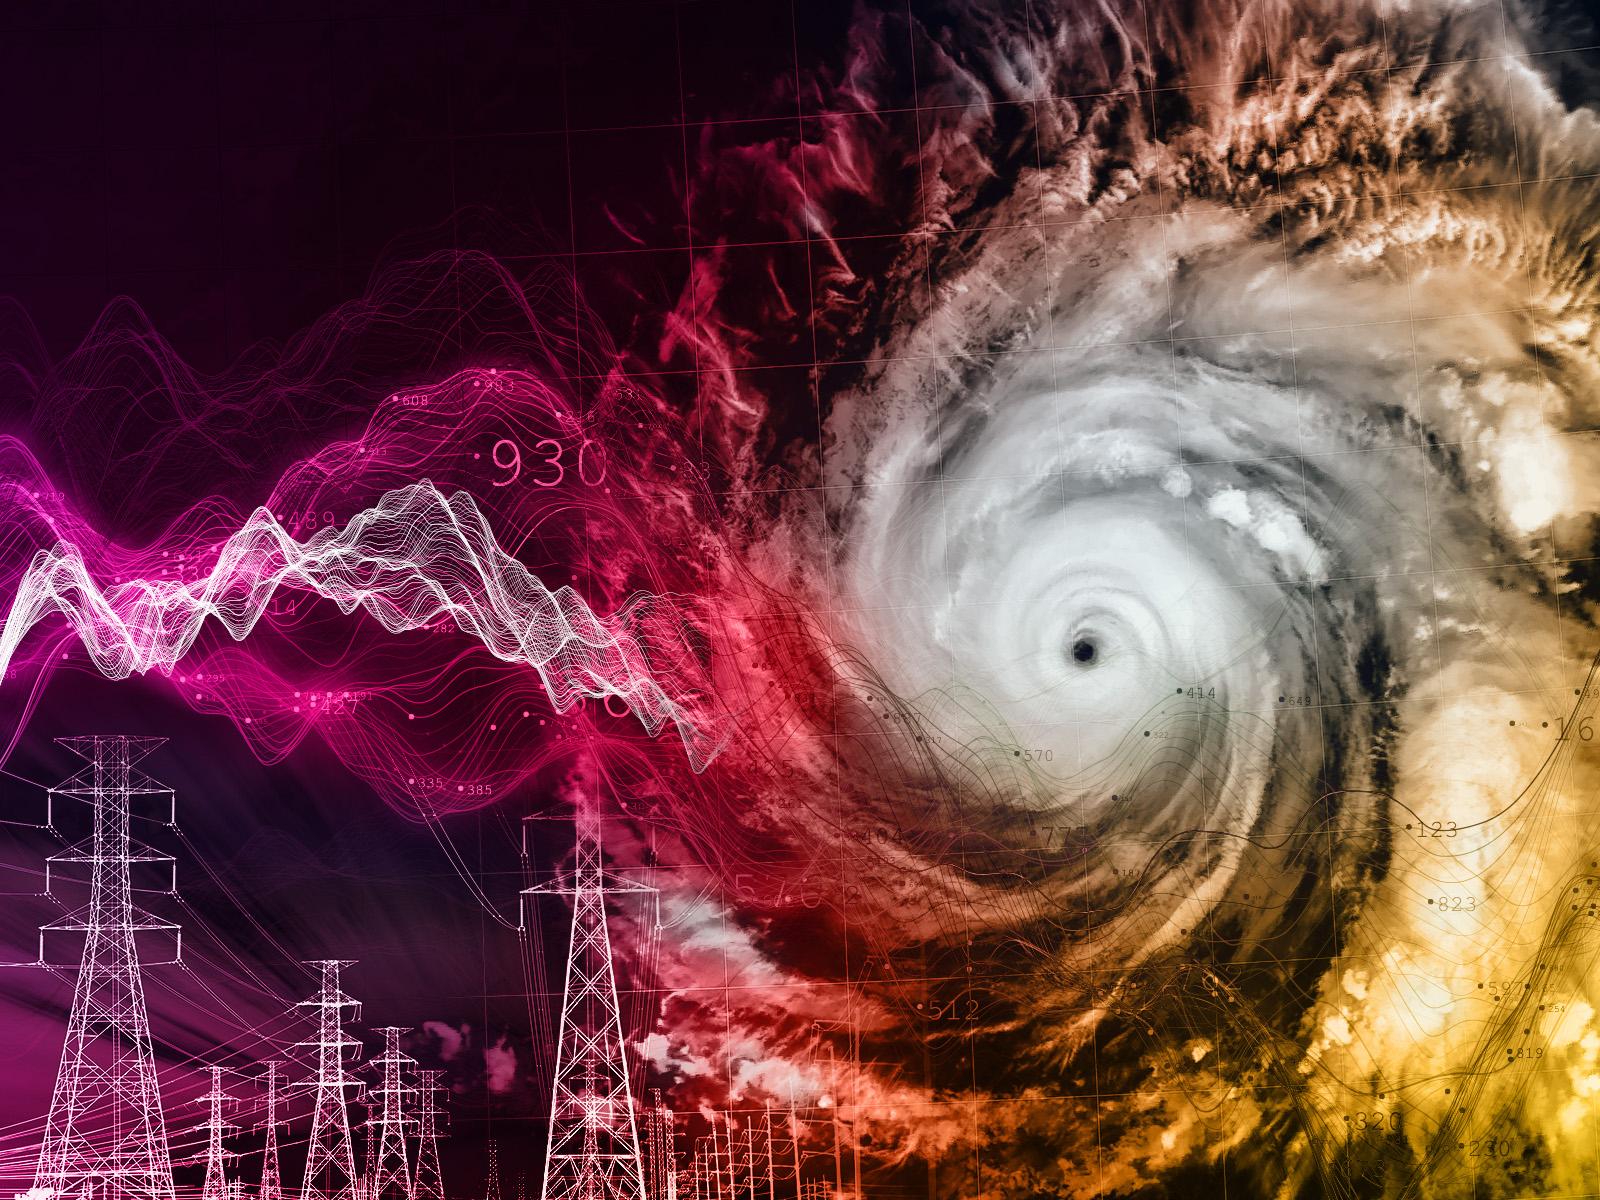 The eye of a hurricane with data points, and transmission lines to show connection